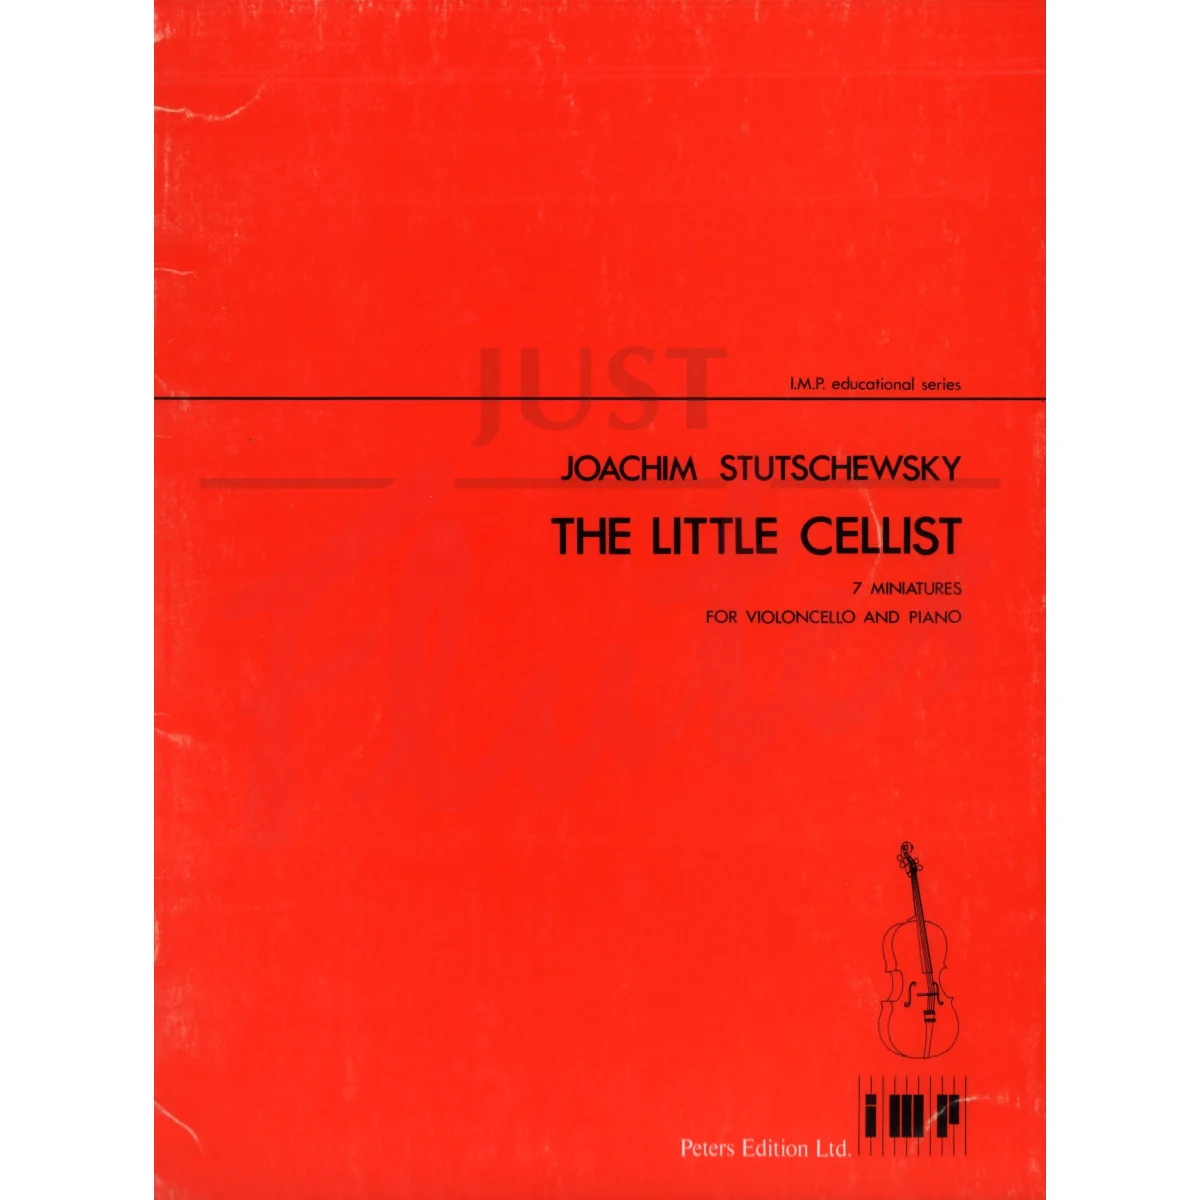 The Little Cellist: 7 Miniatures for Cello and Piano